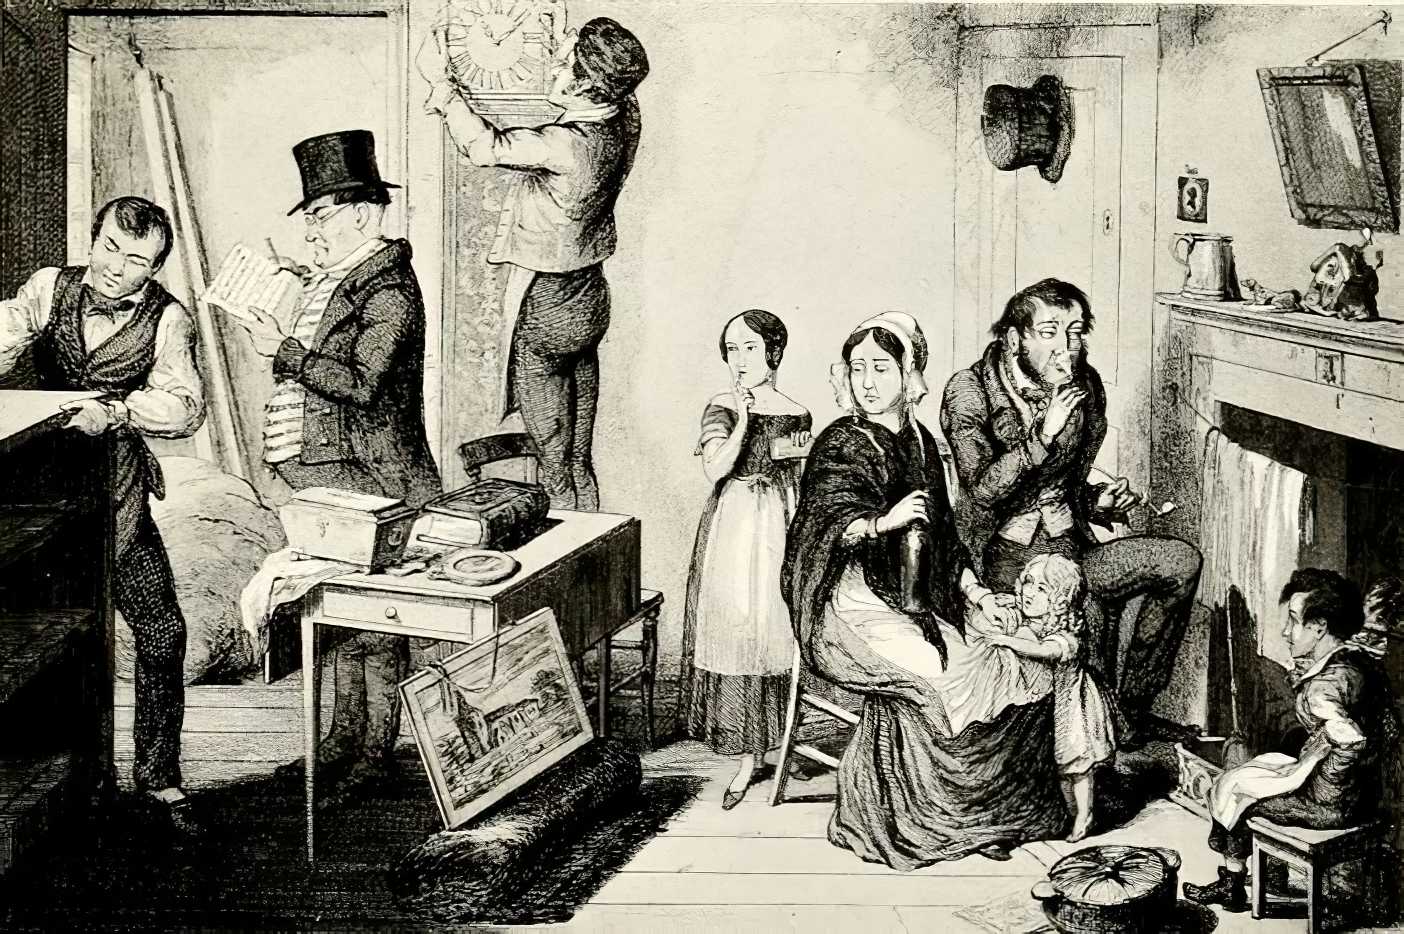 The Bottle, an Early Graphic Novel by Cruikshank